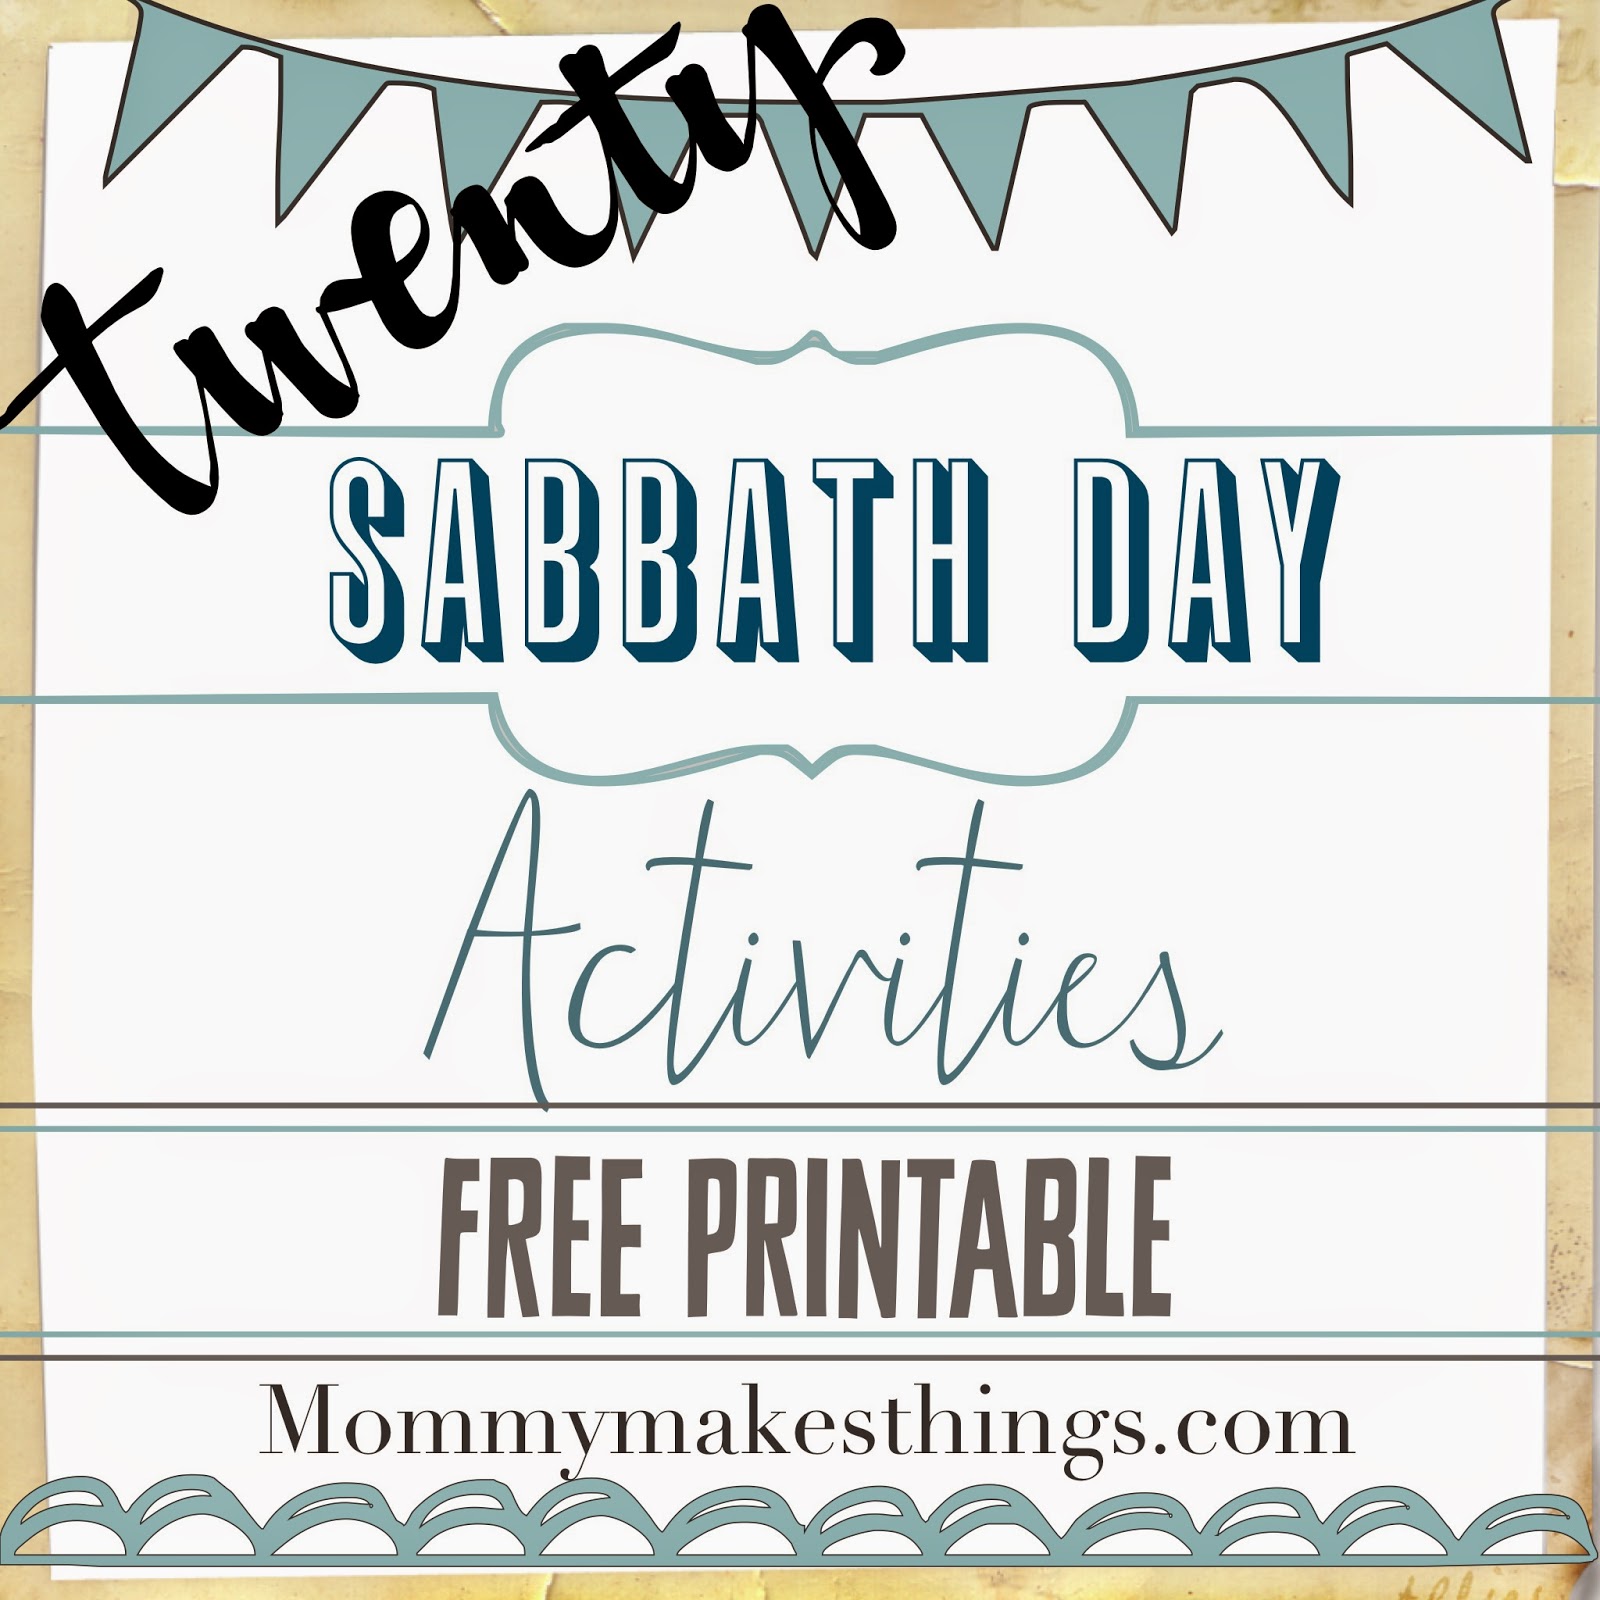 sabbath day coloring pages and activities - photo #13